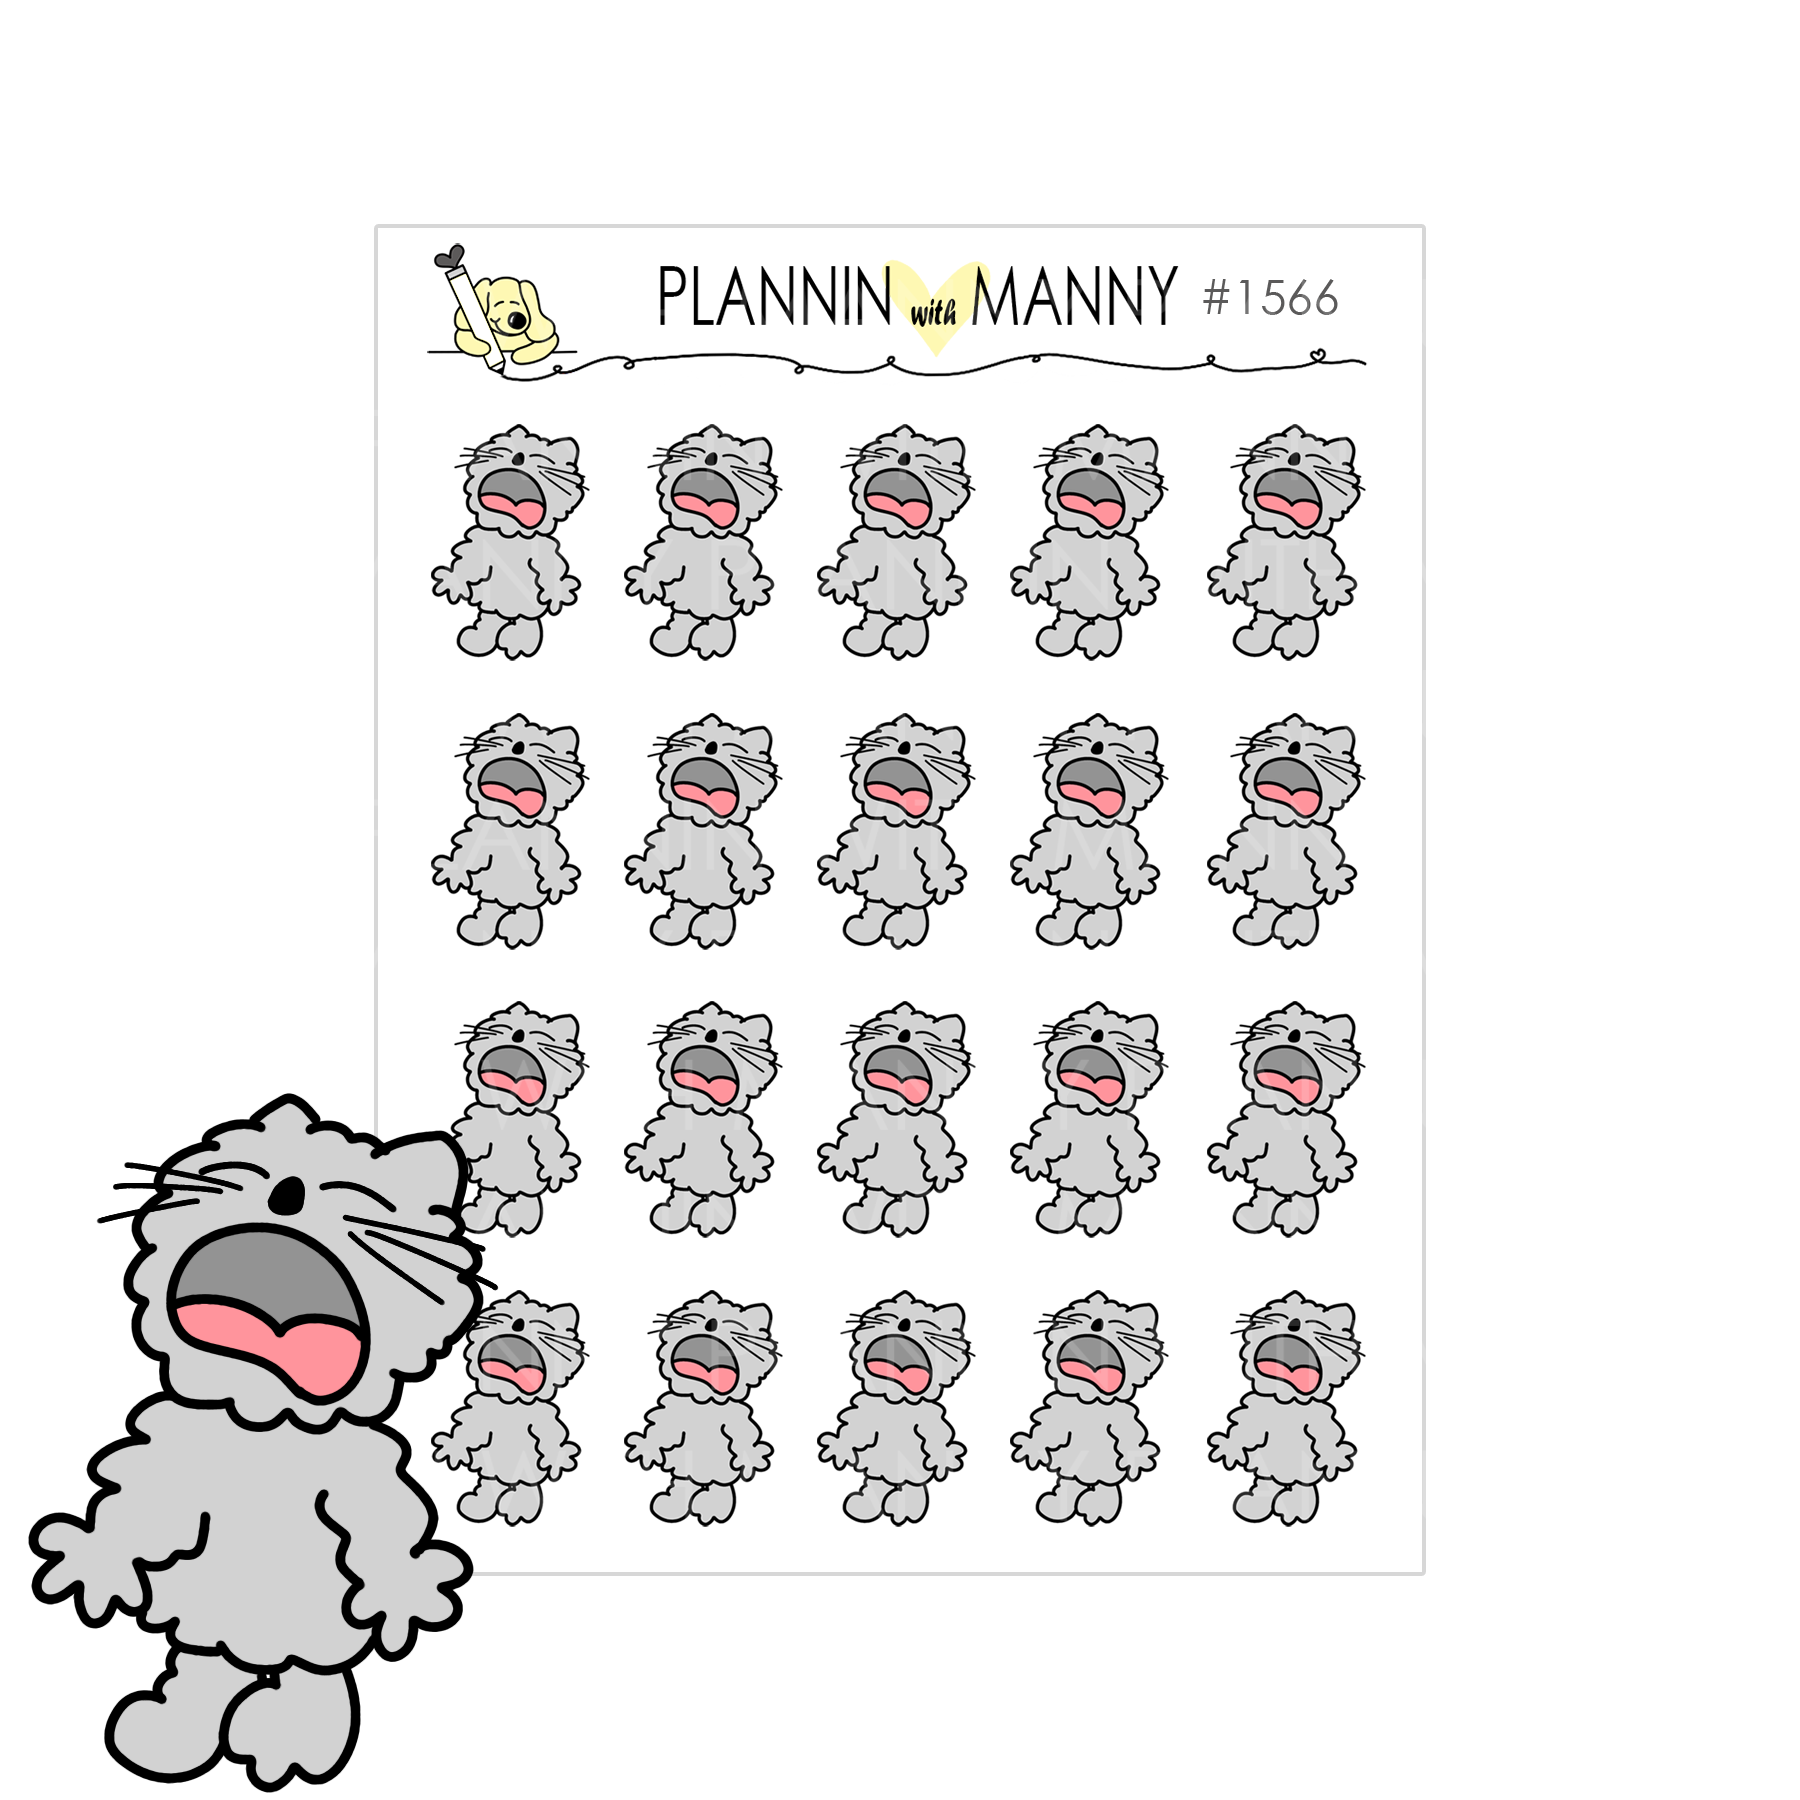 1566 Tantrum Owen Planner Stickers! I need a few of these! LOL!